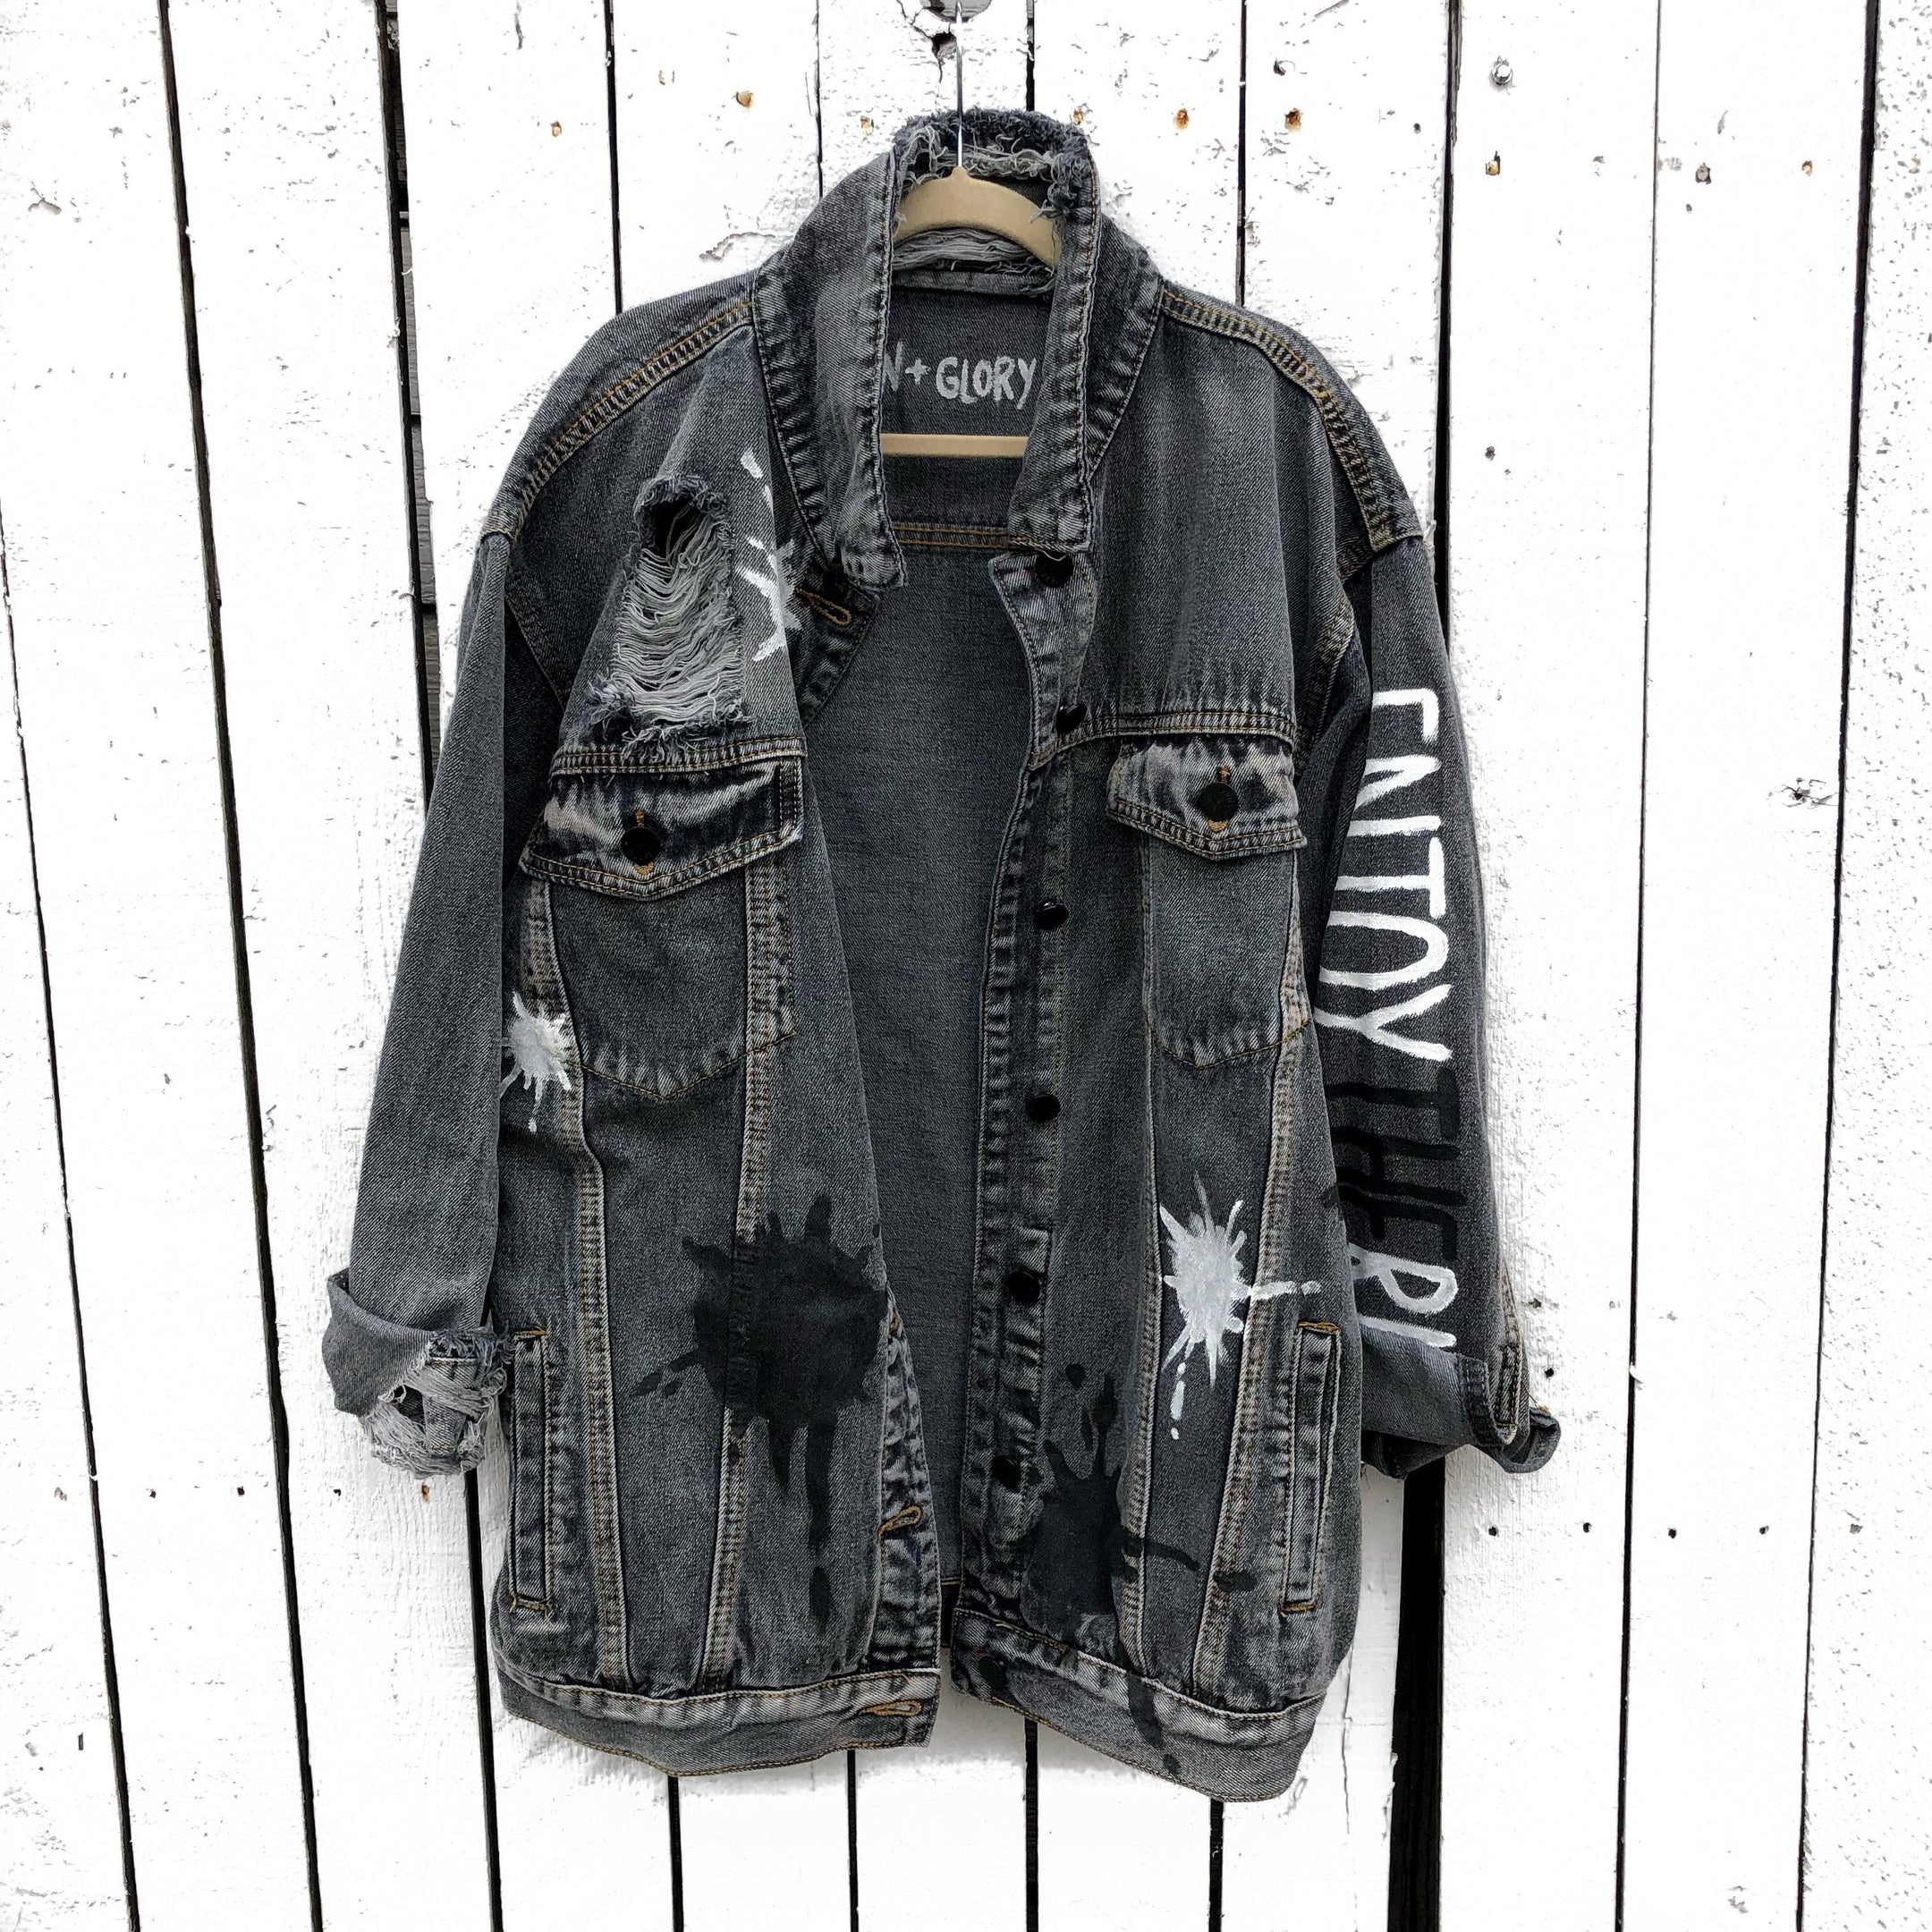 ENJOY THE RIDE' (with your initial) DENIM JACKET